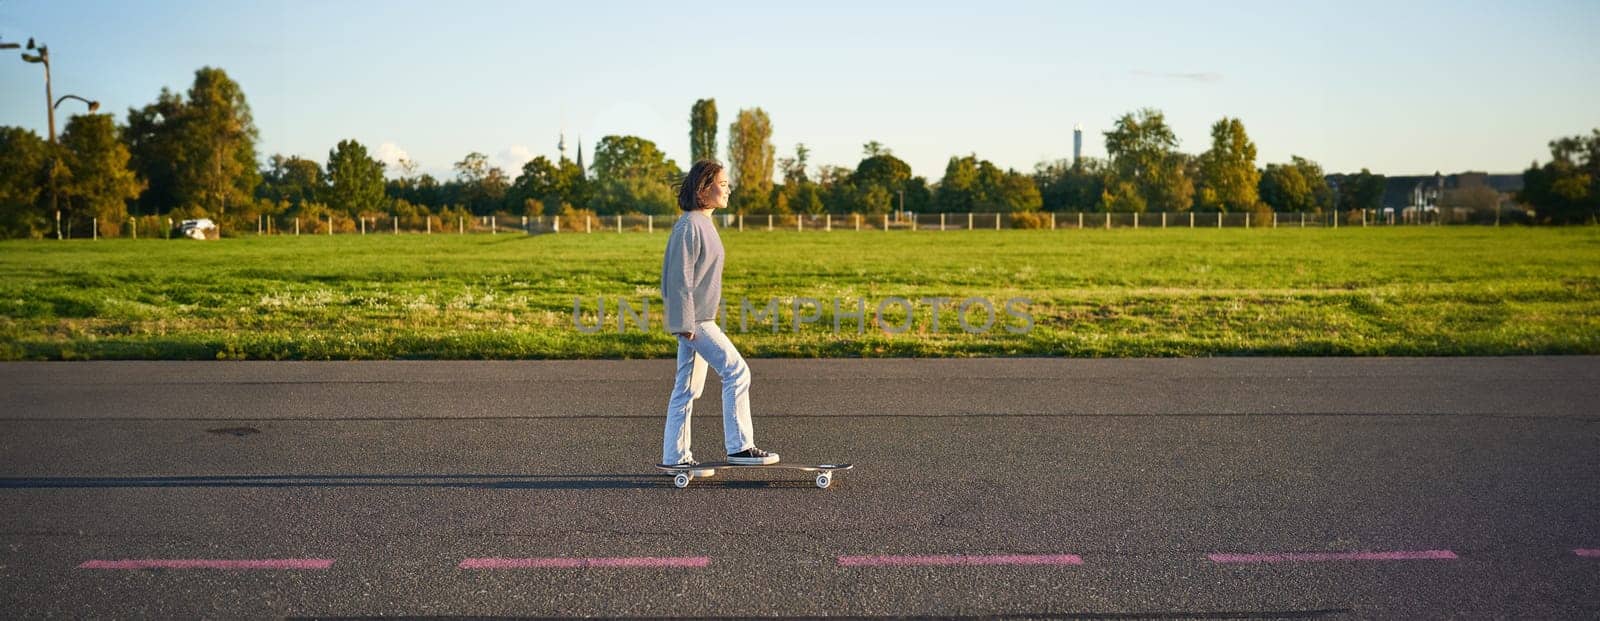 Beautiful asian skater girl riding her longboard on sunny empty road. Young woman enjoying her skate ride smiling and laughing.